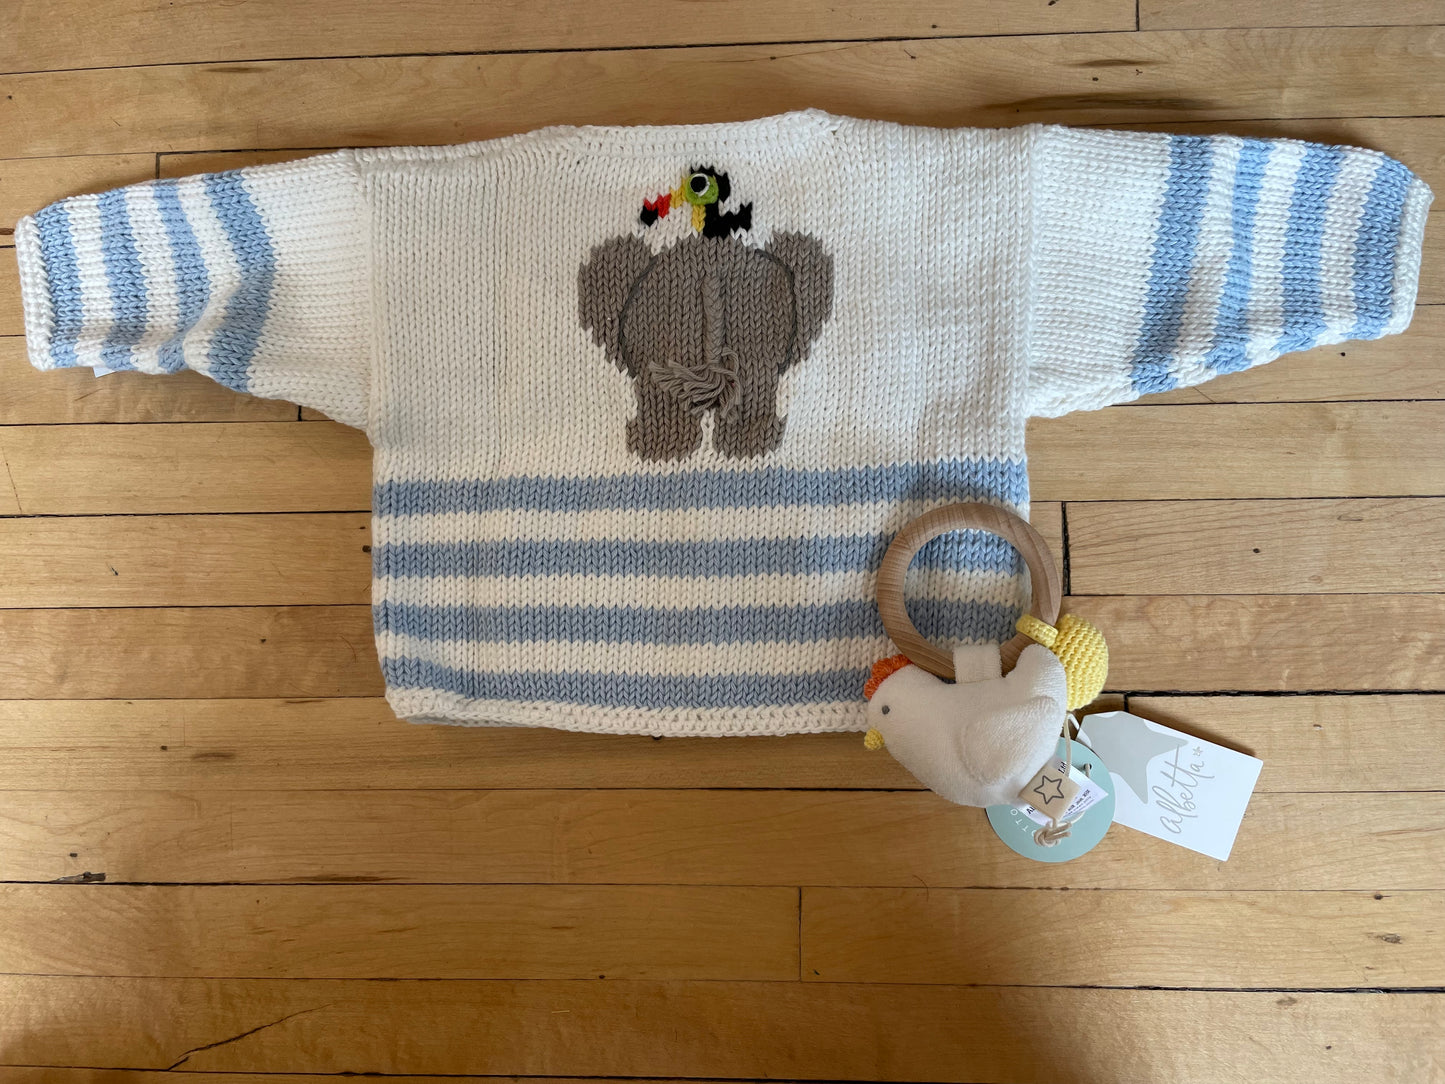 Blue Elephant and Friends Knit Sweater